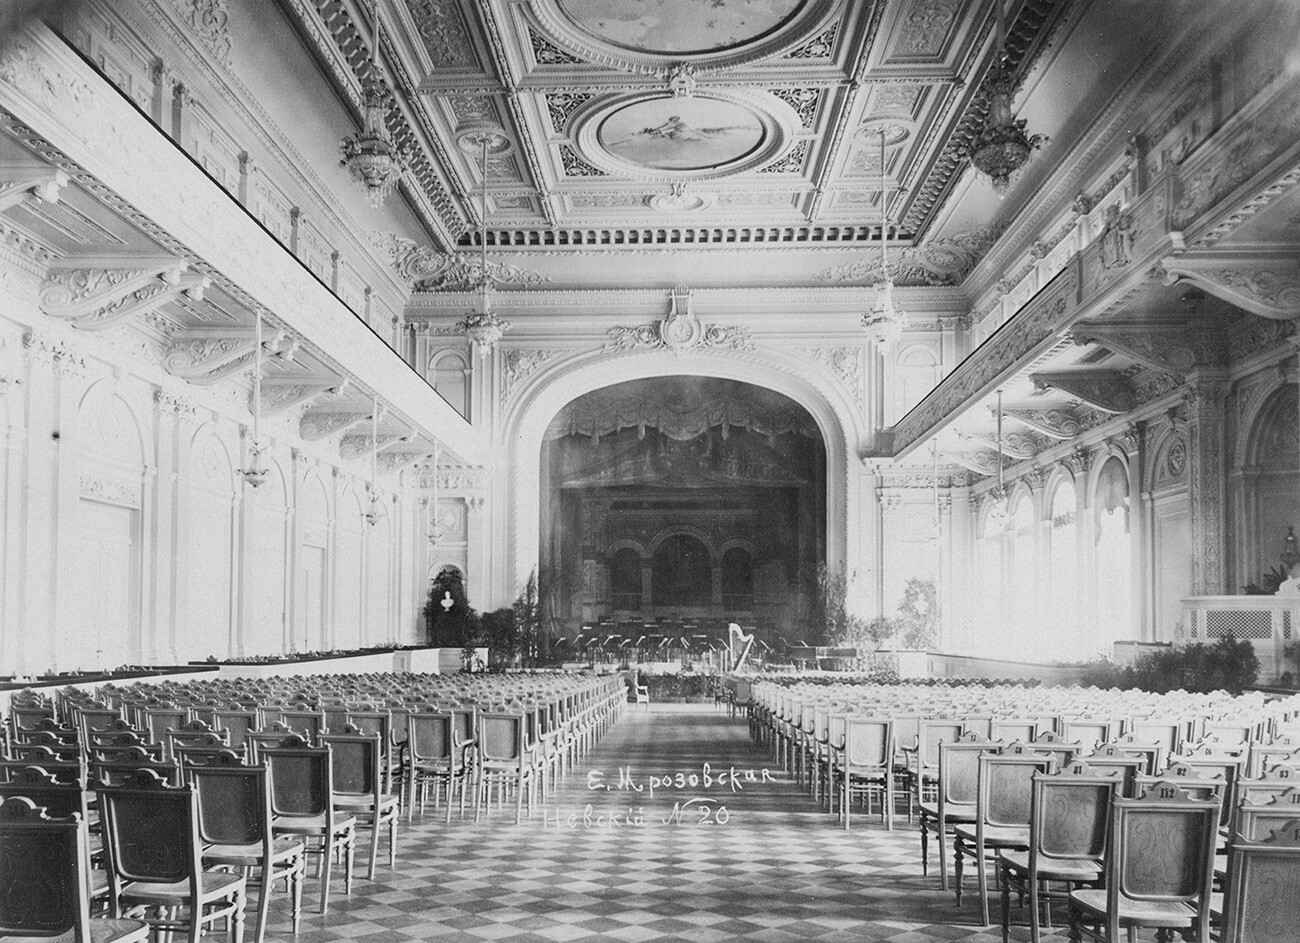 The big hall of the St. Petersburg Conservatory